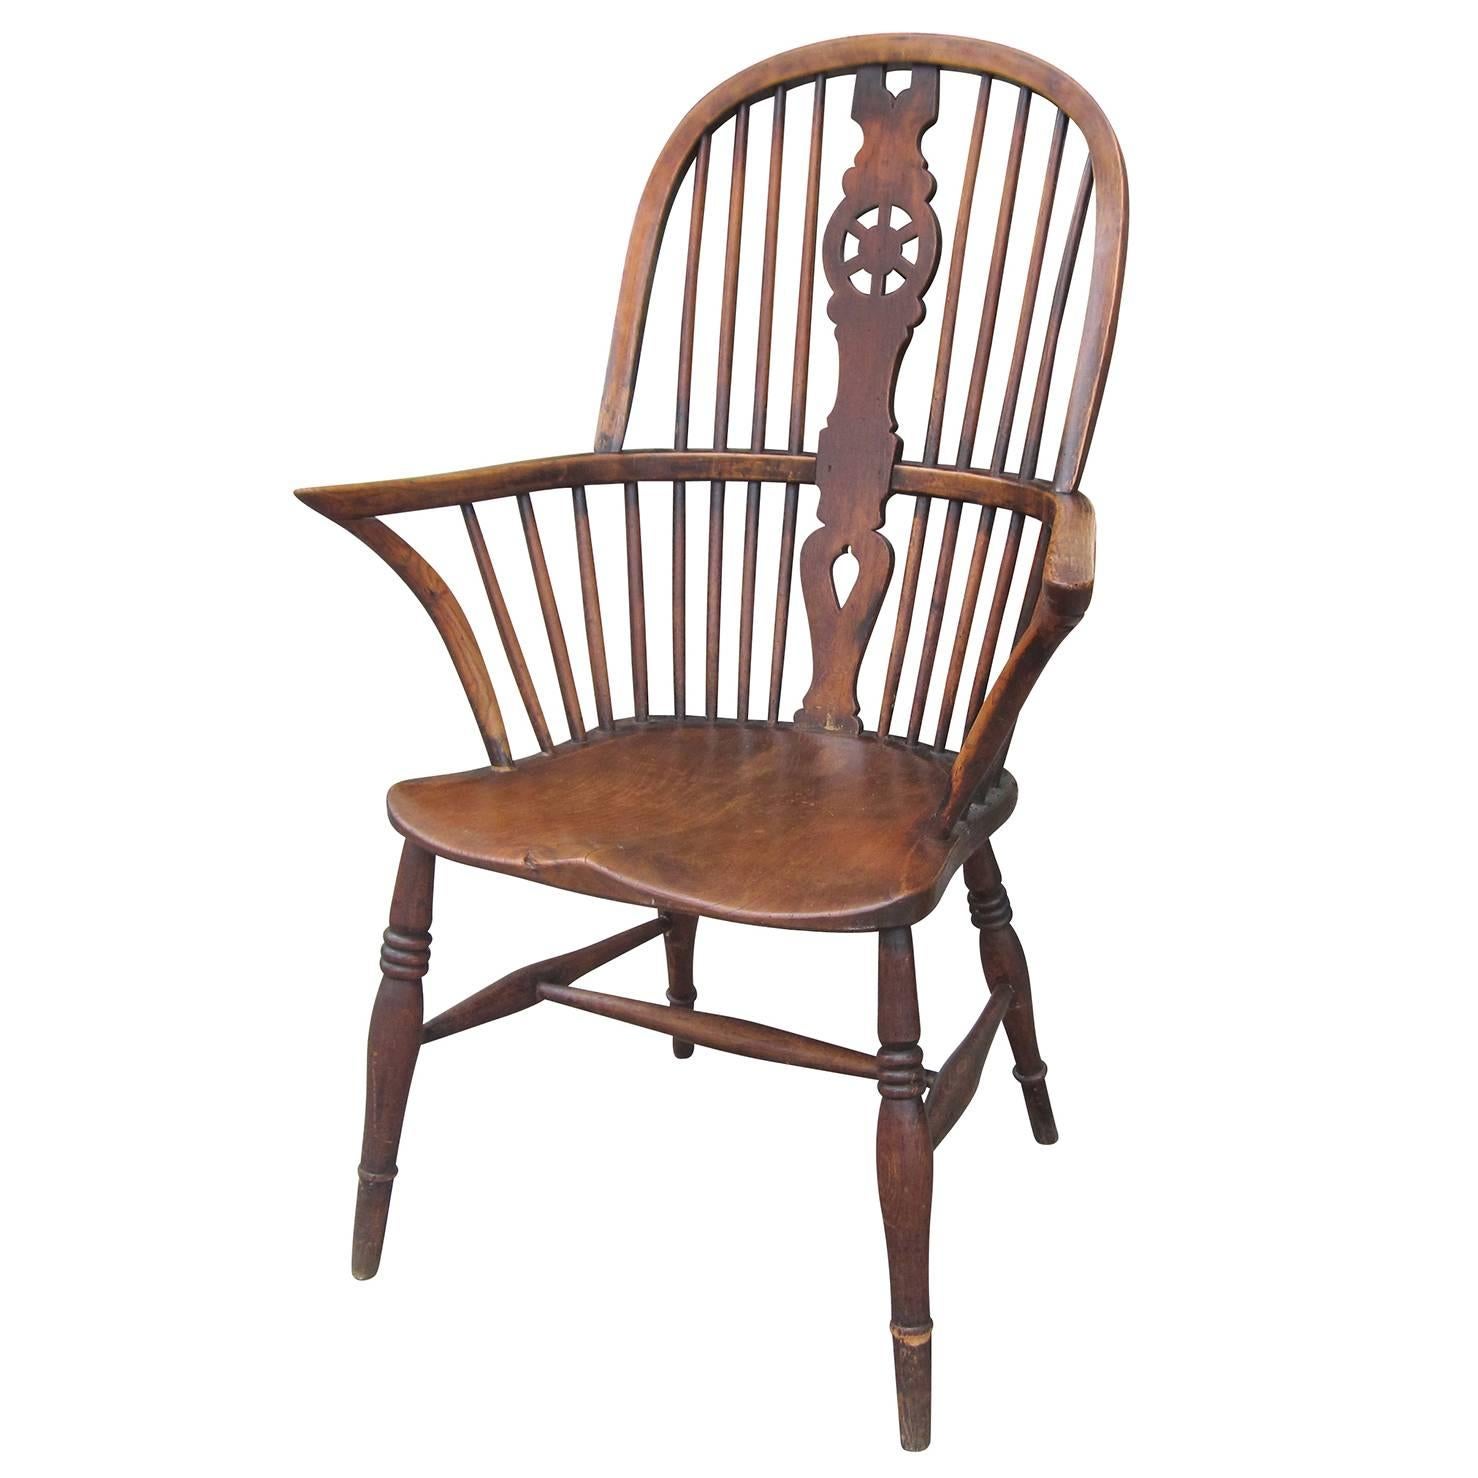 Early 19th Century Windsor Chair